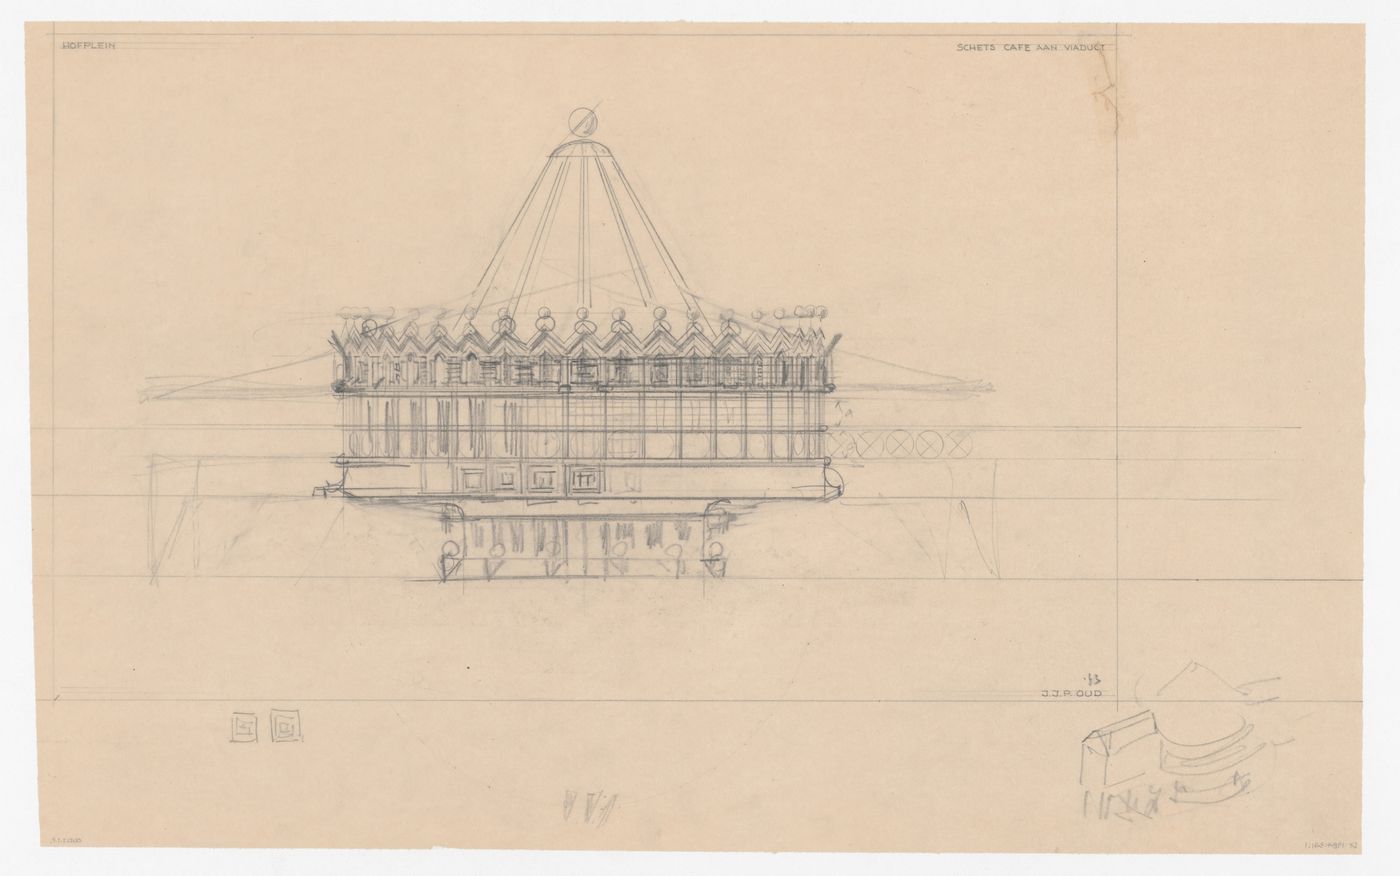 Elevation and sketch perspective for Café Viaduct for the reconstruction of the Hofplein (city centre), Rotterdam, Netherlands